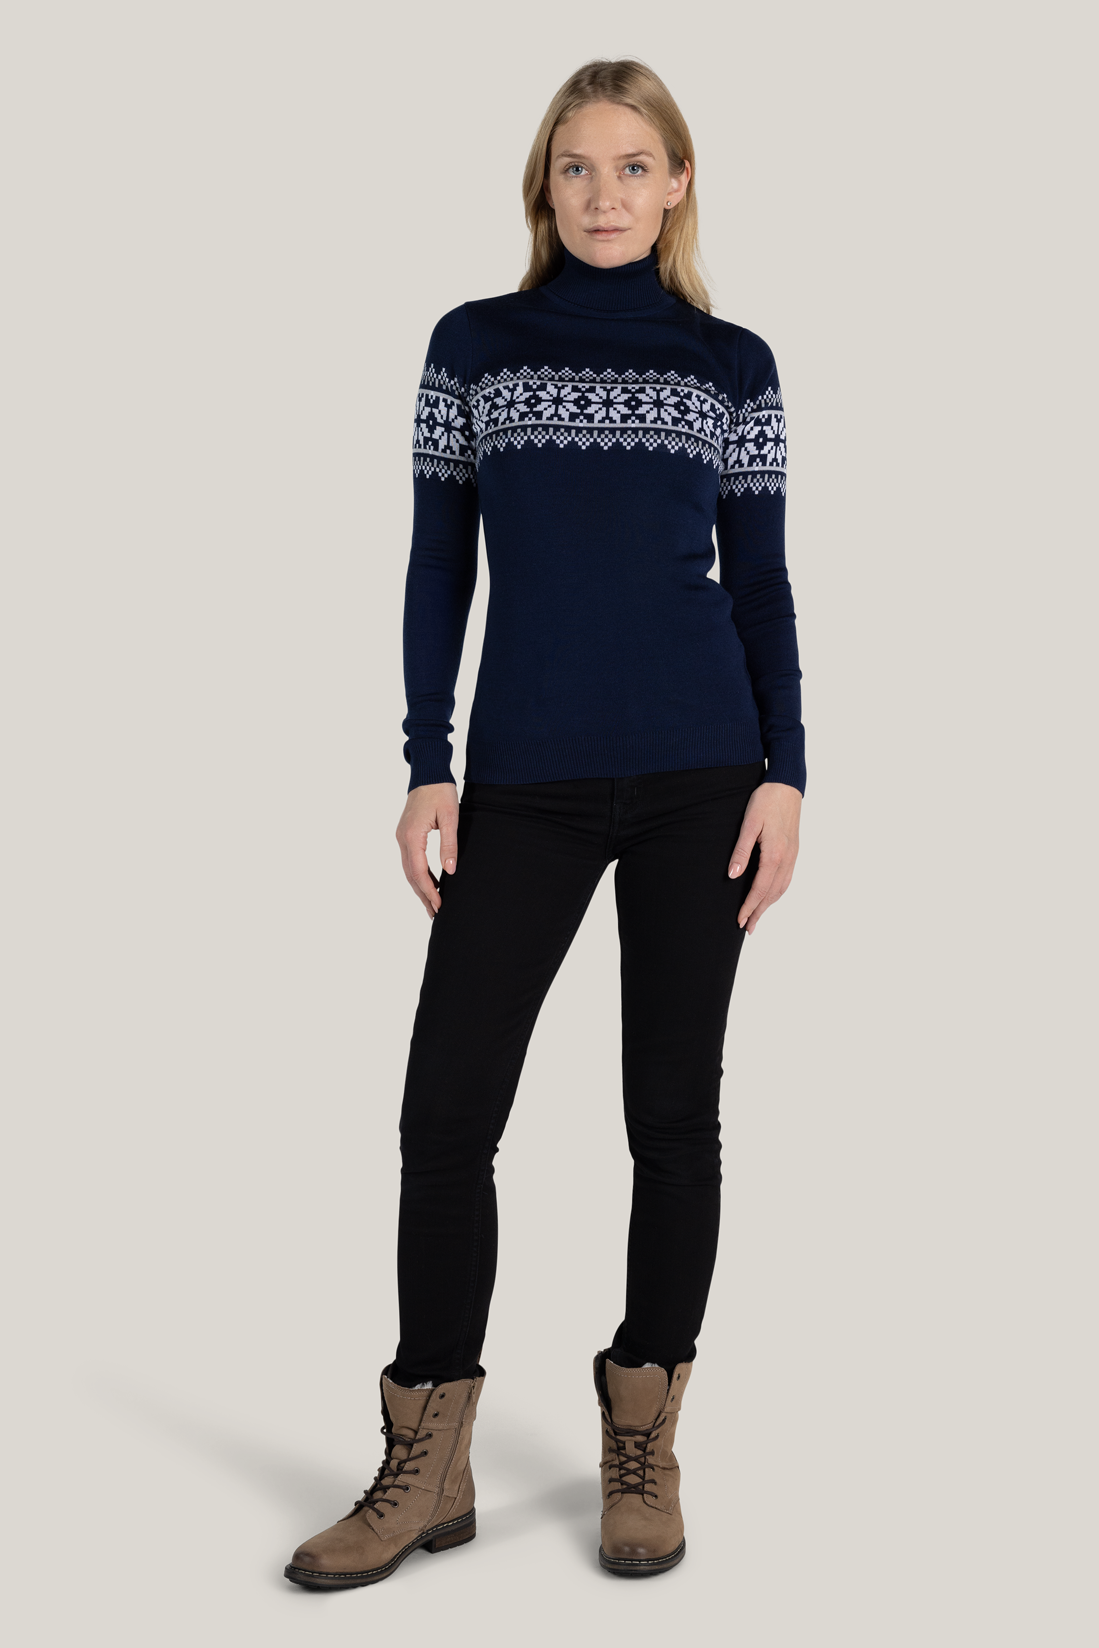 Turtleneck sweater Liv in blue made of Merino and Tencel from Tidløs